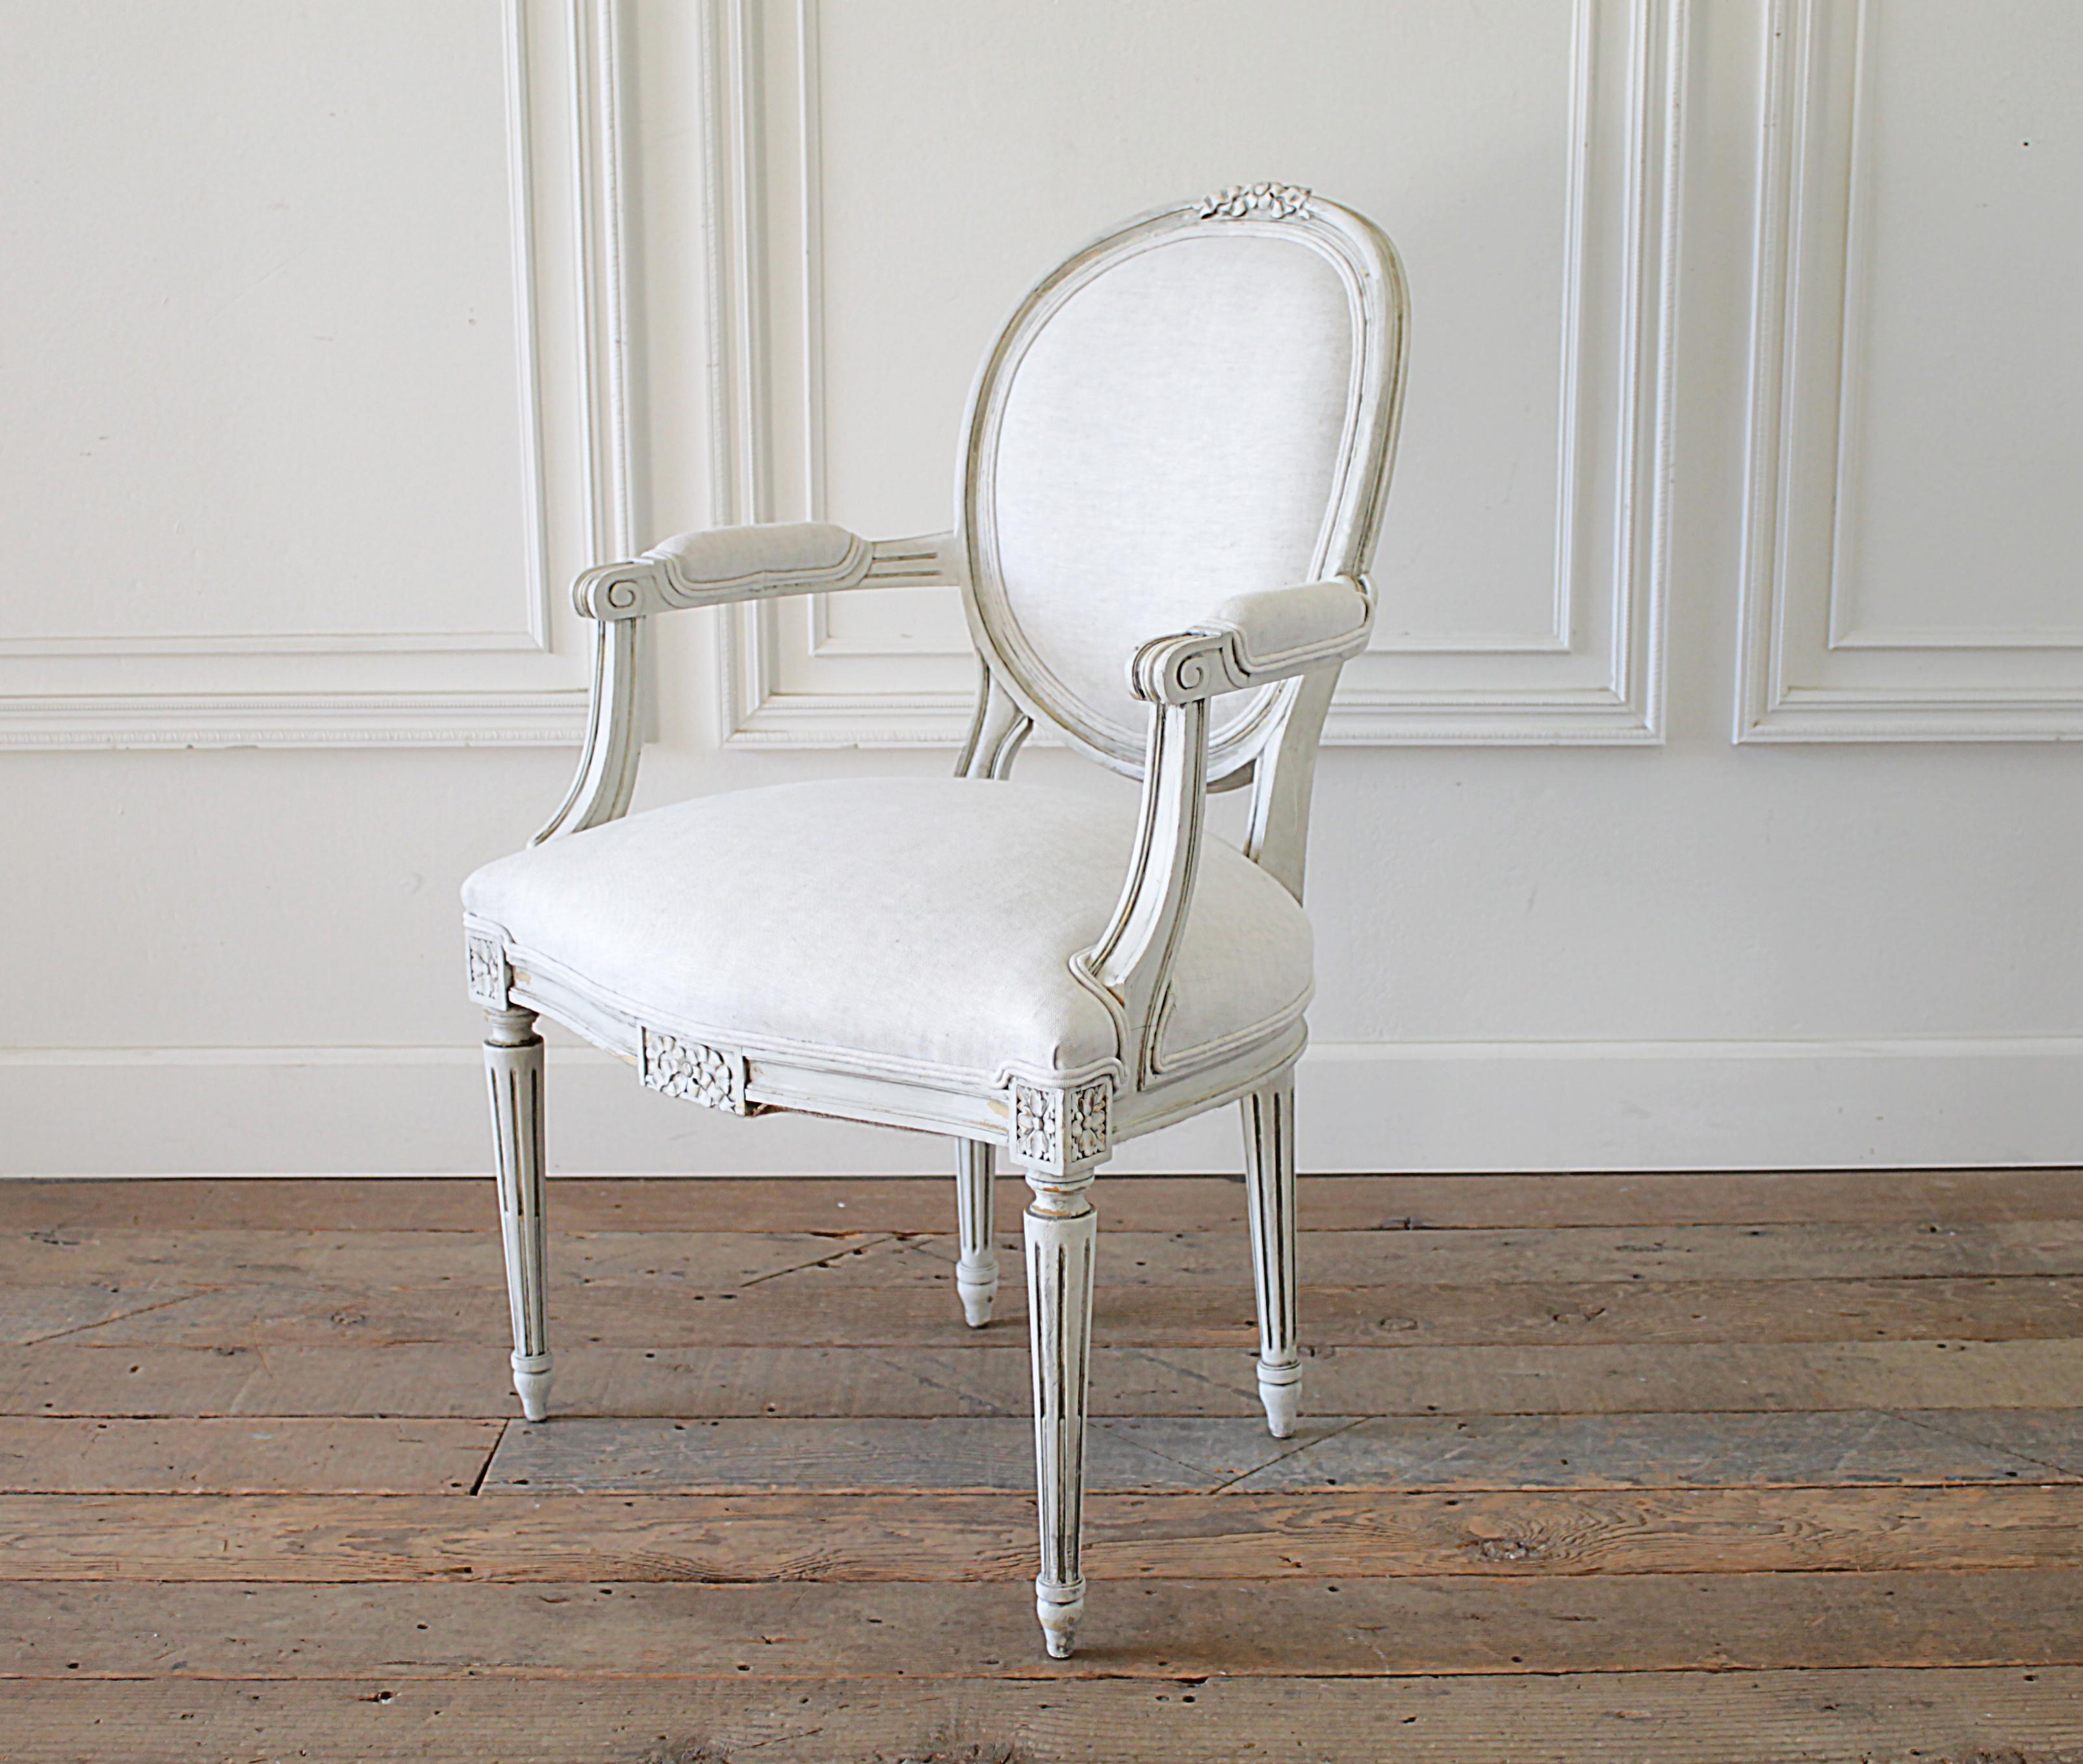 Louis XVI style carved and painted ribbon armchair
Painted in our oyster white finish, with subtle distressed edges and finished with an antique glazed patina.
Brand new upholstery in 100% pure Belgian linen, finished with a double welt